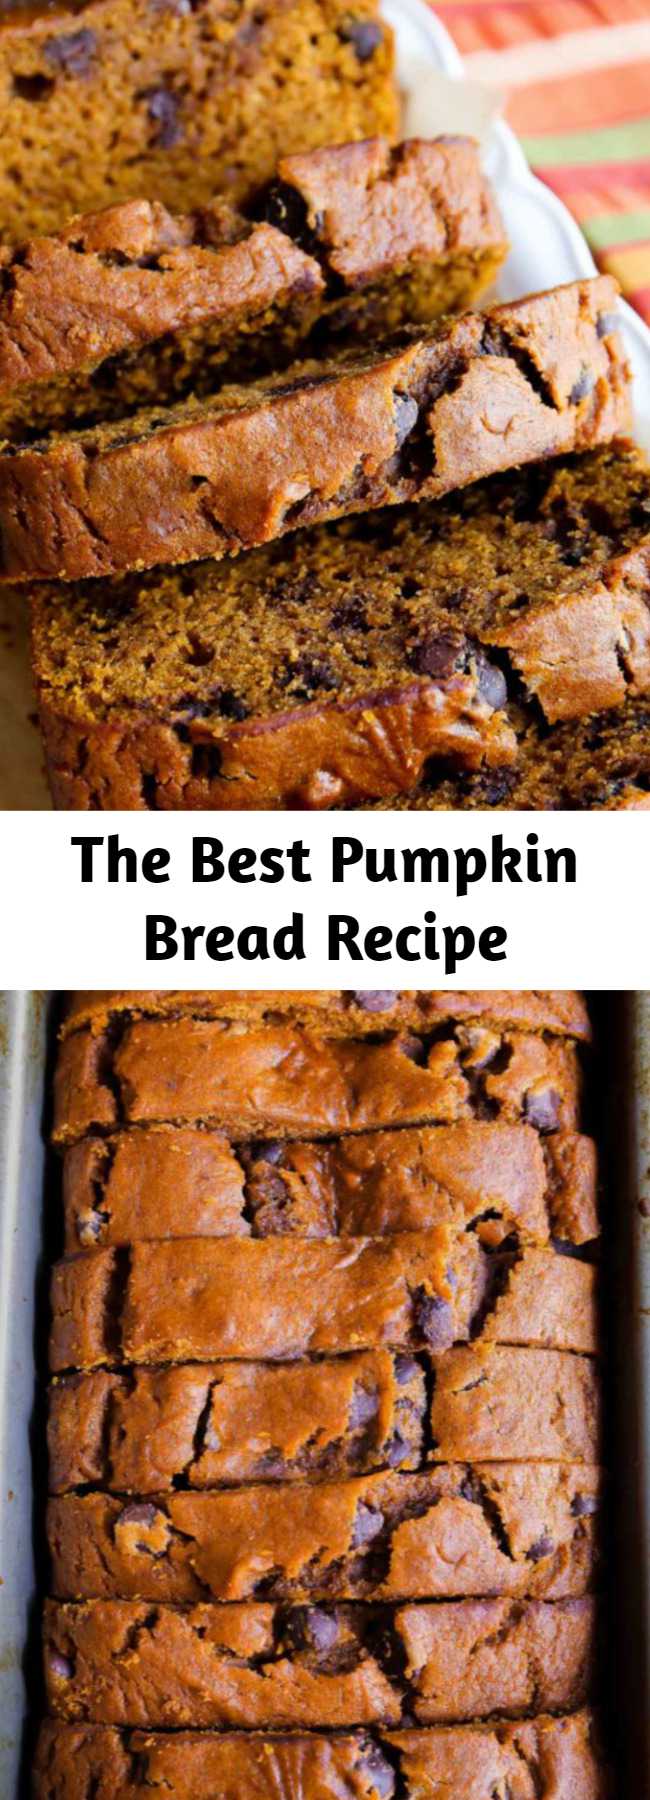 The Best Pumpkin Bread Recipe - Homemade pumpkin bread is a favorite fall recipe packed with sweet cinnamon spice, chocolate chips, and tons of pumpkin flavor. The days of bland pumpkin bread are behind us!